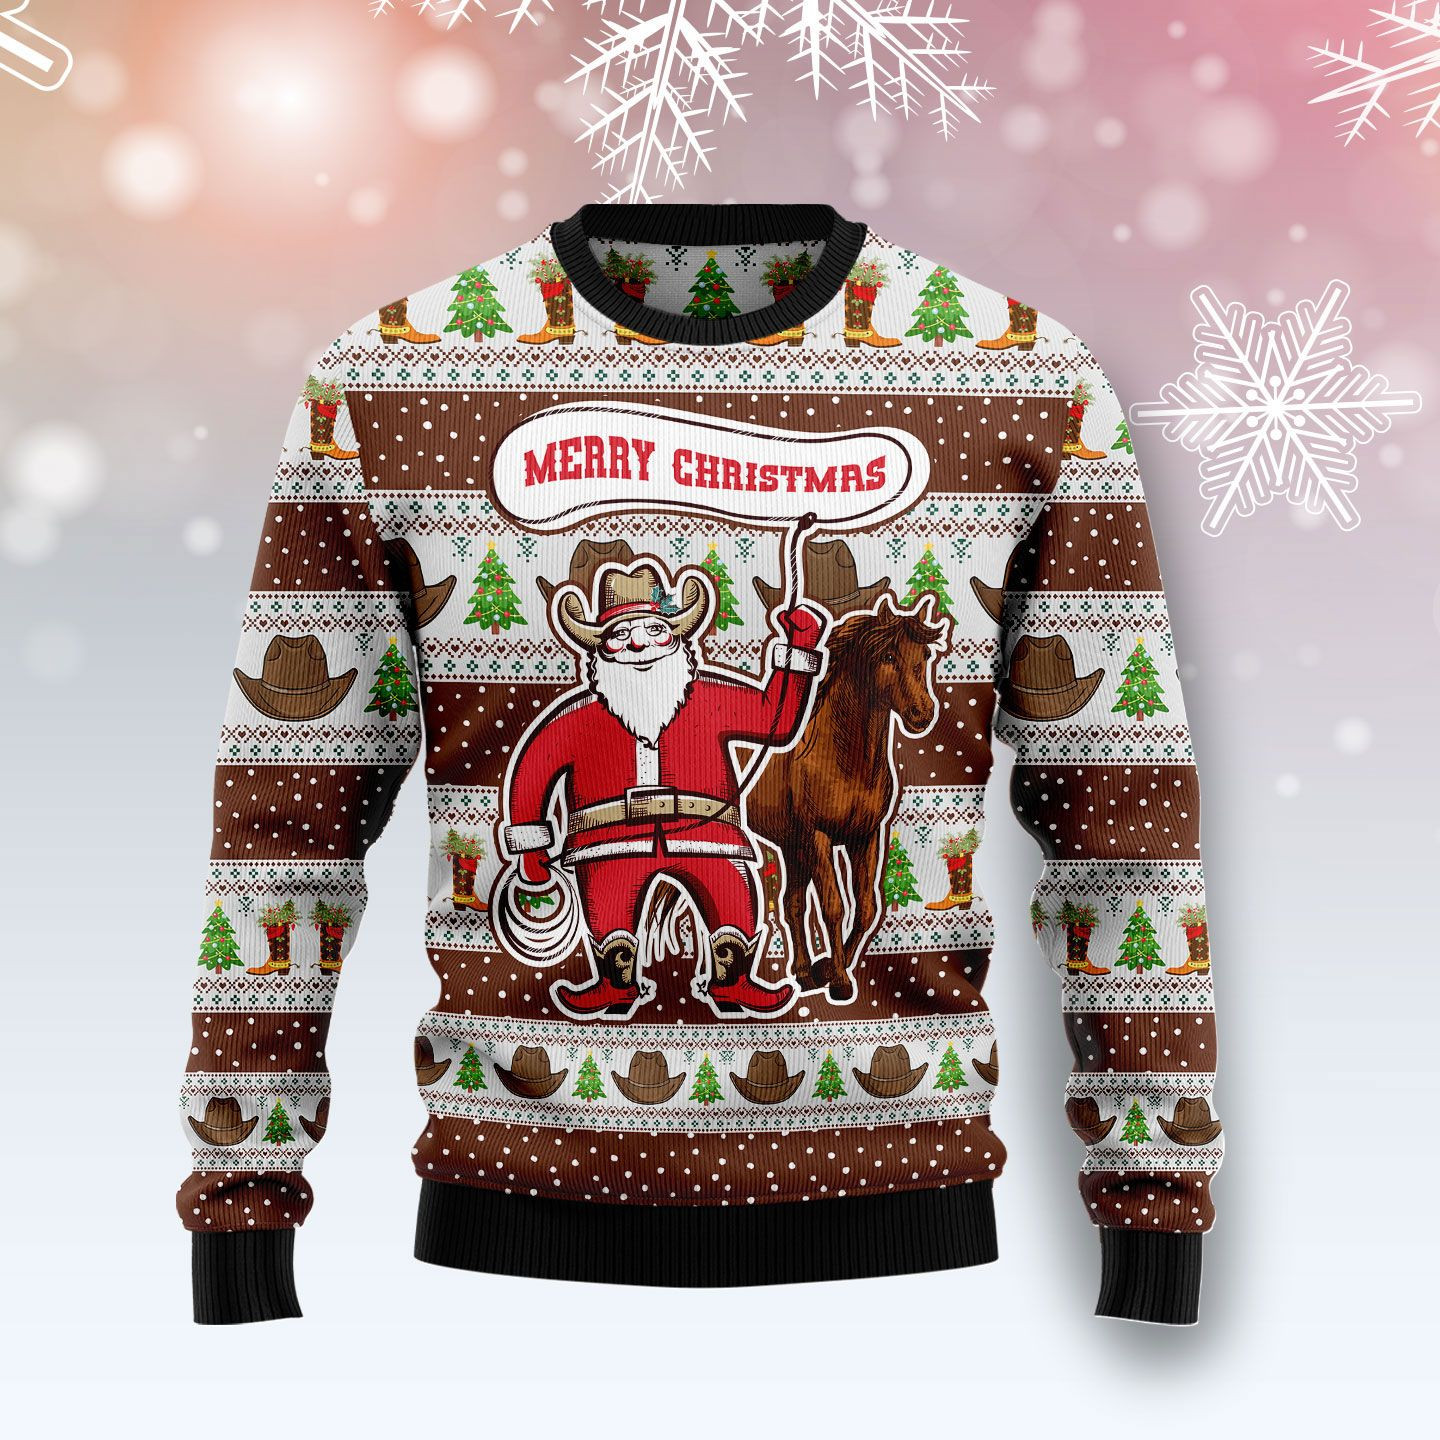 Cowboy Santa Claus Ugly Christmas Sweater Ugly Sweater For Men Women, Holiday Sweater